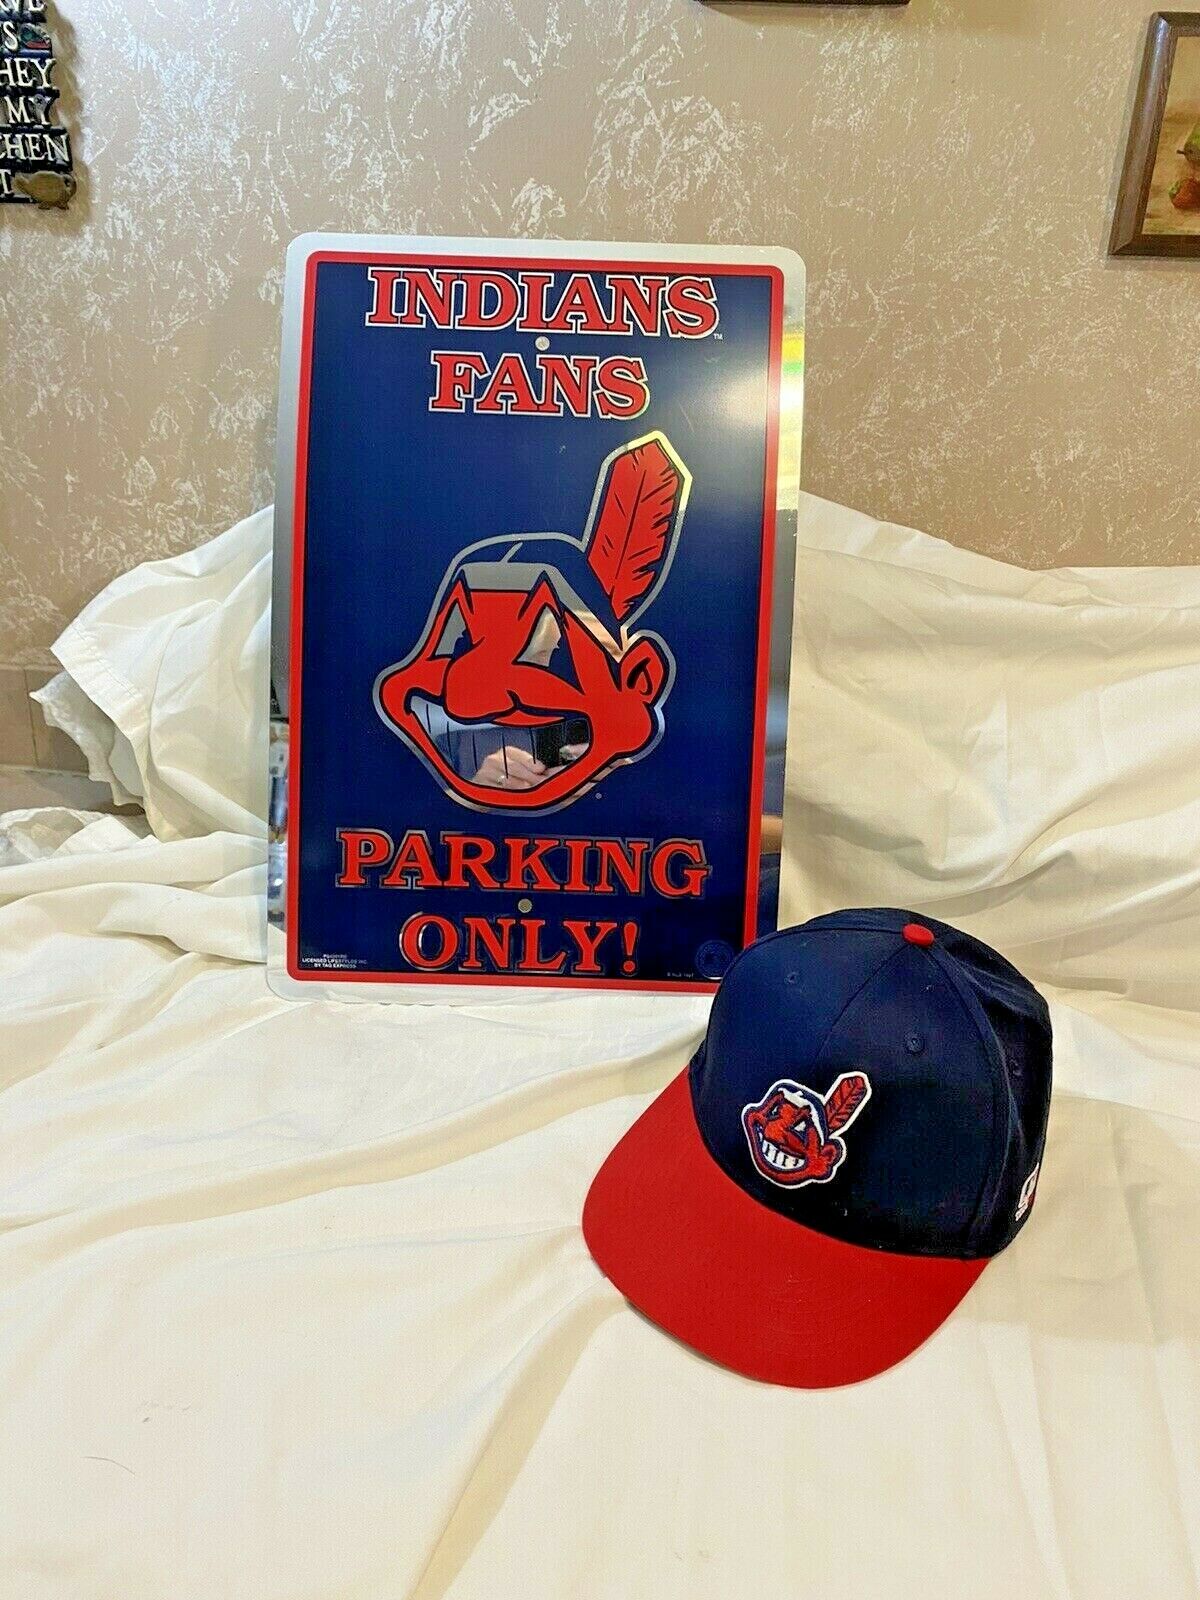 Cleveland Indians Ball Cap And Plastic Parking Signage Decor